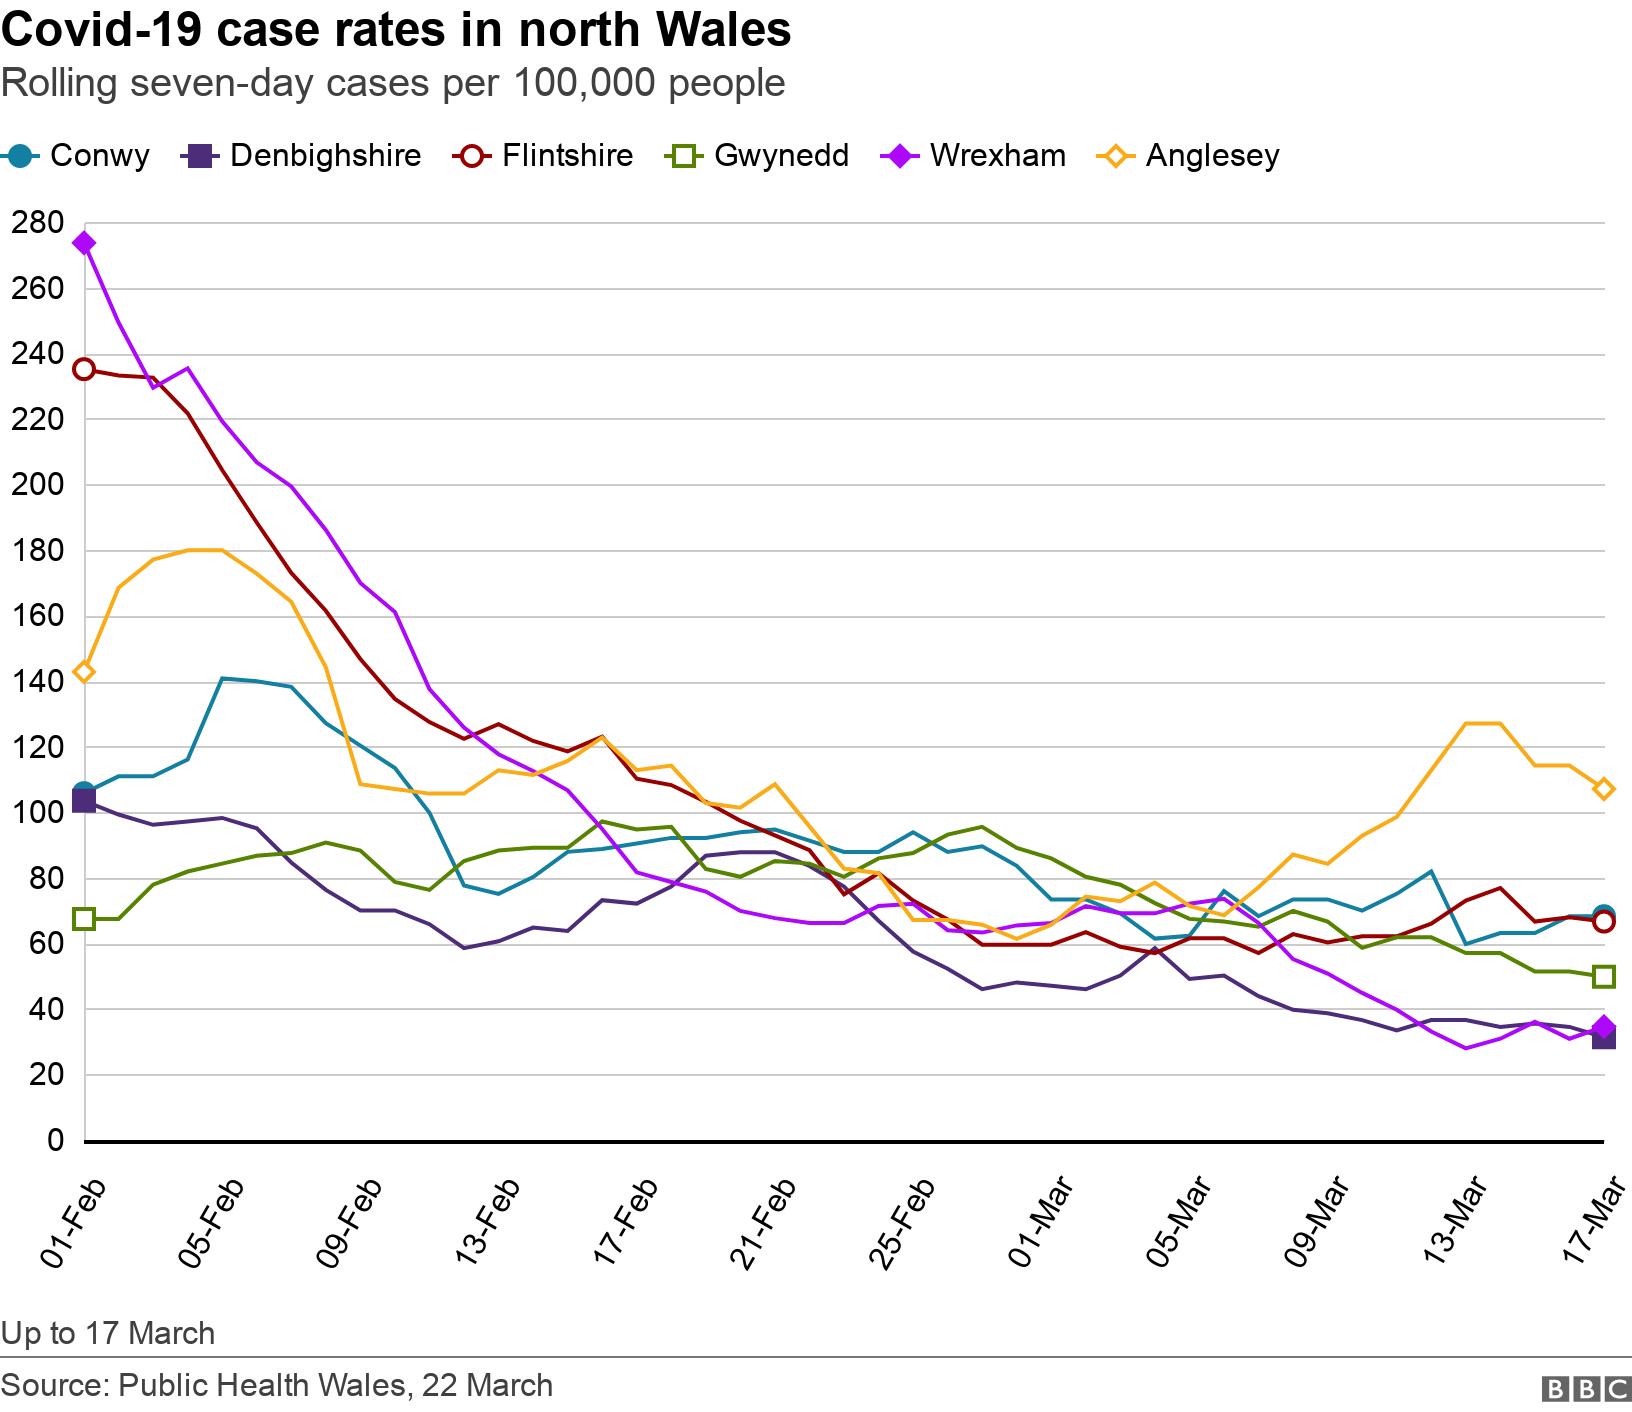 Covid-19 case rates in north Wales. Rolling seven-day cases per 100,000 people.  Up to 17 March.